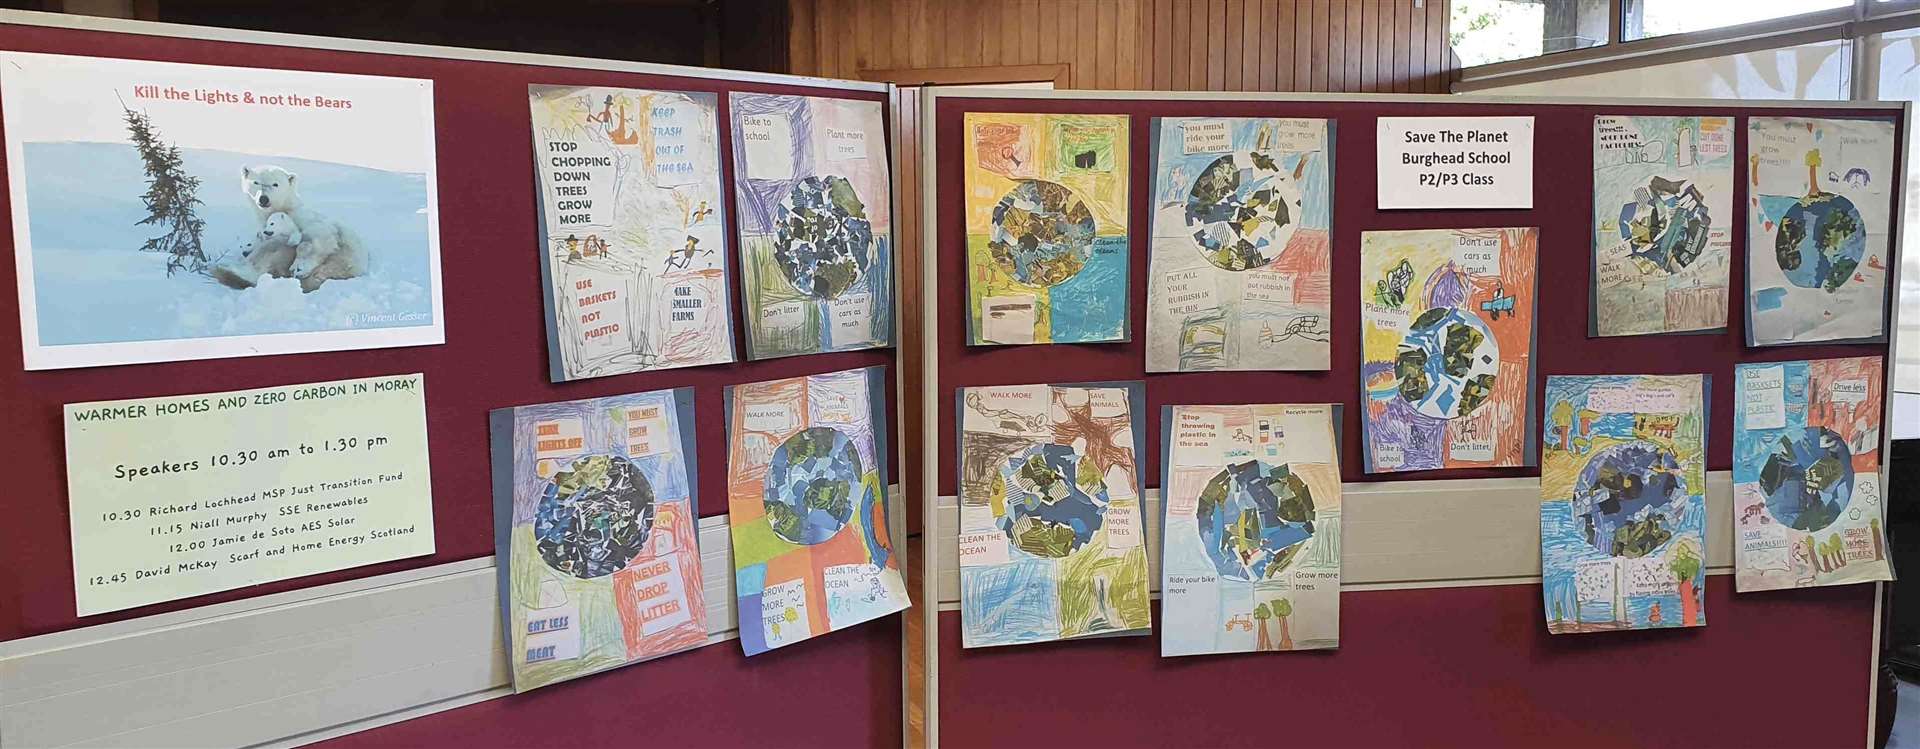 Entries from Moray primary schools for the Save the Planet competition.